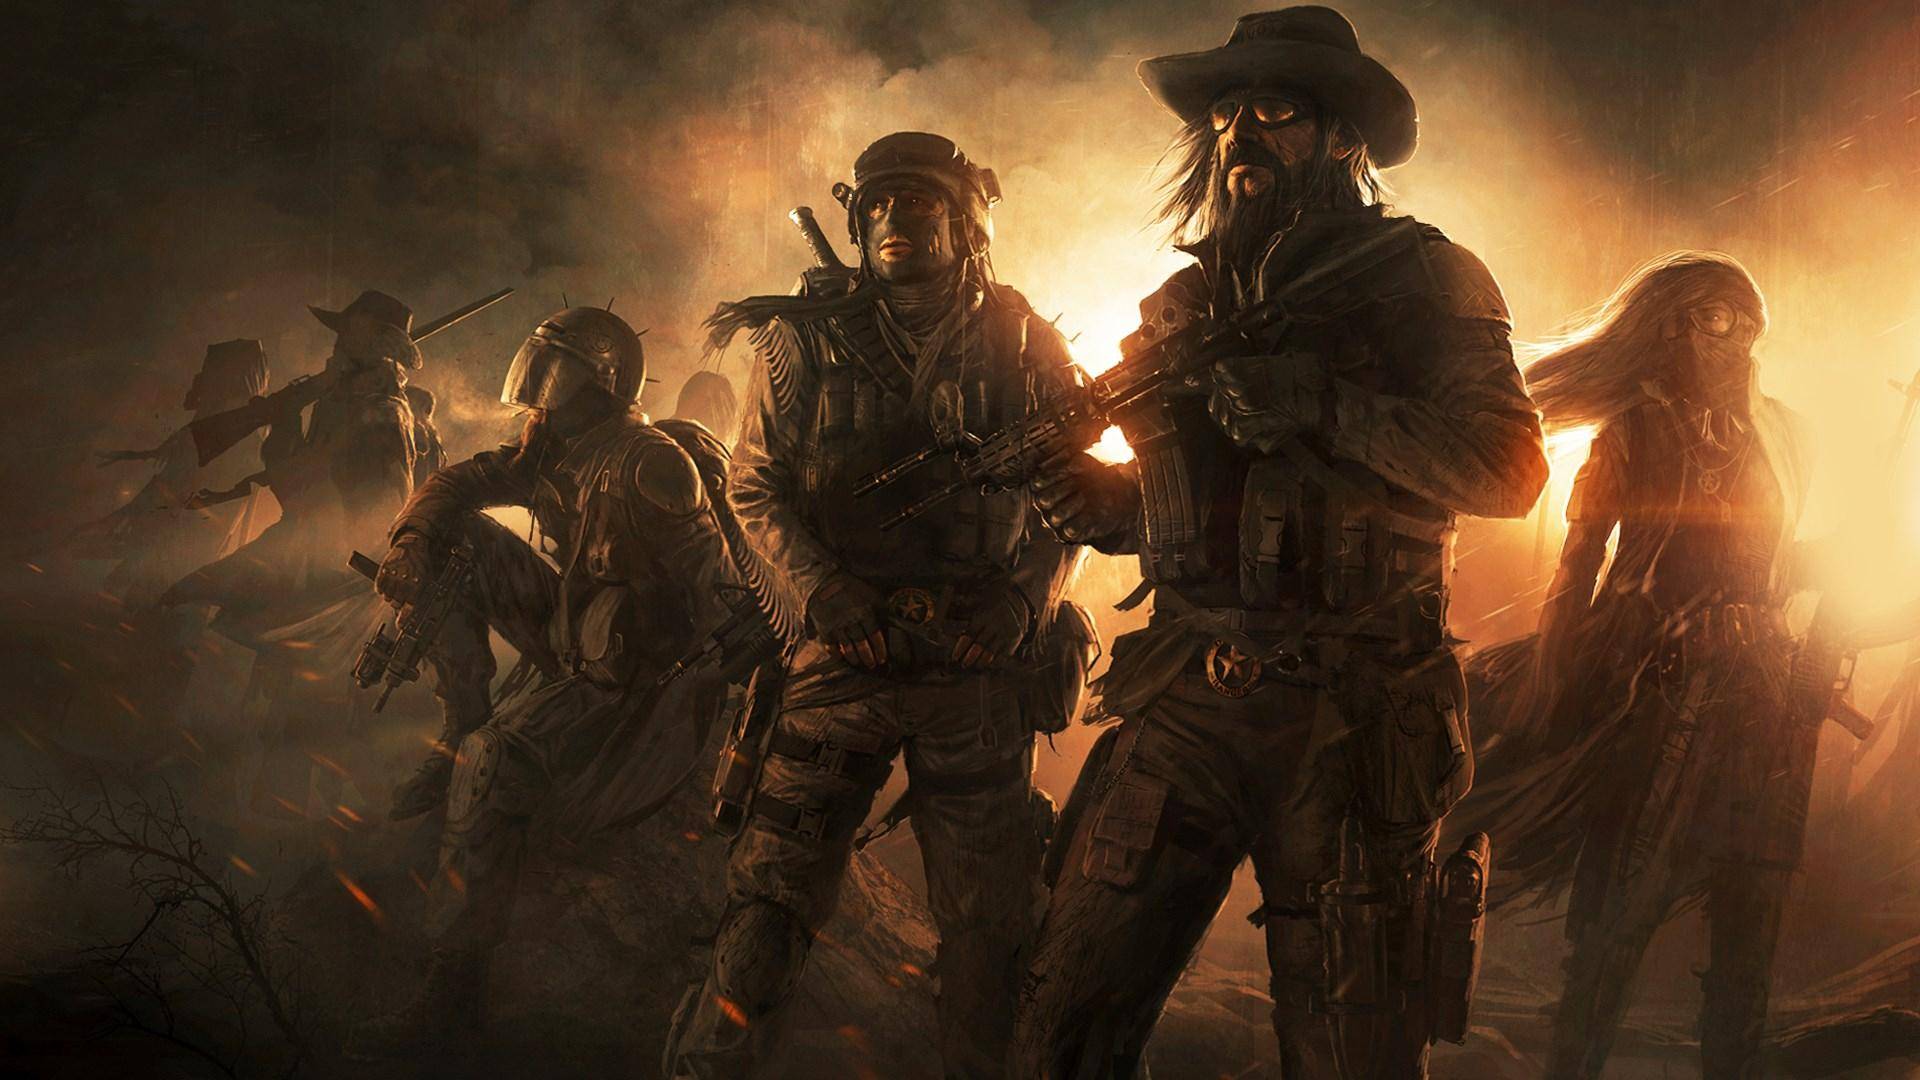 Get Wasteland 2 for free for a limited time